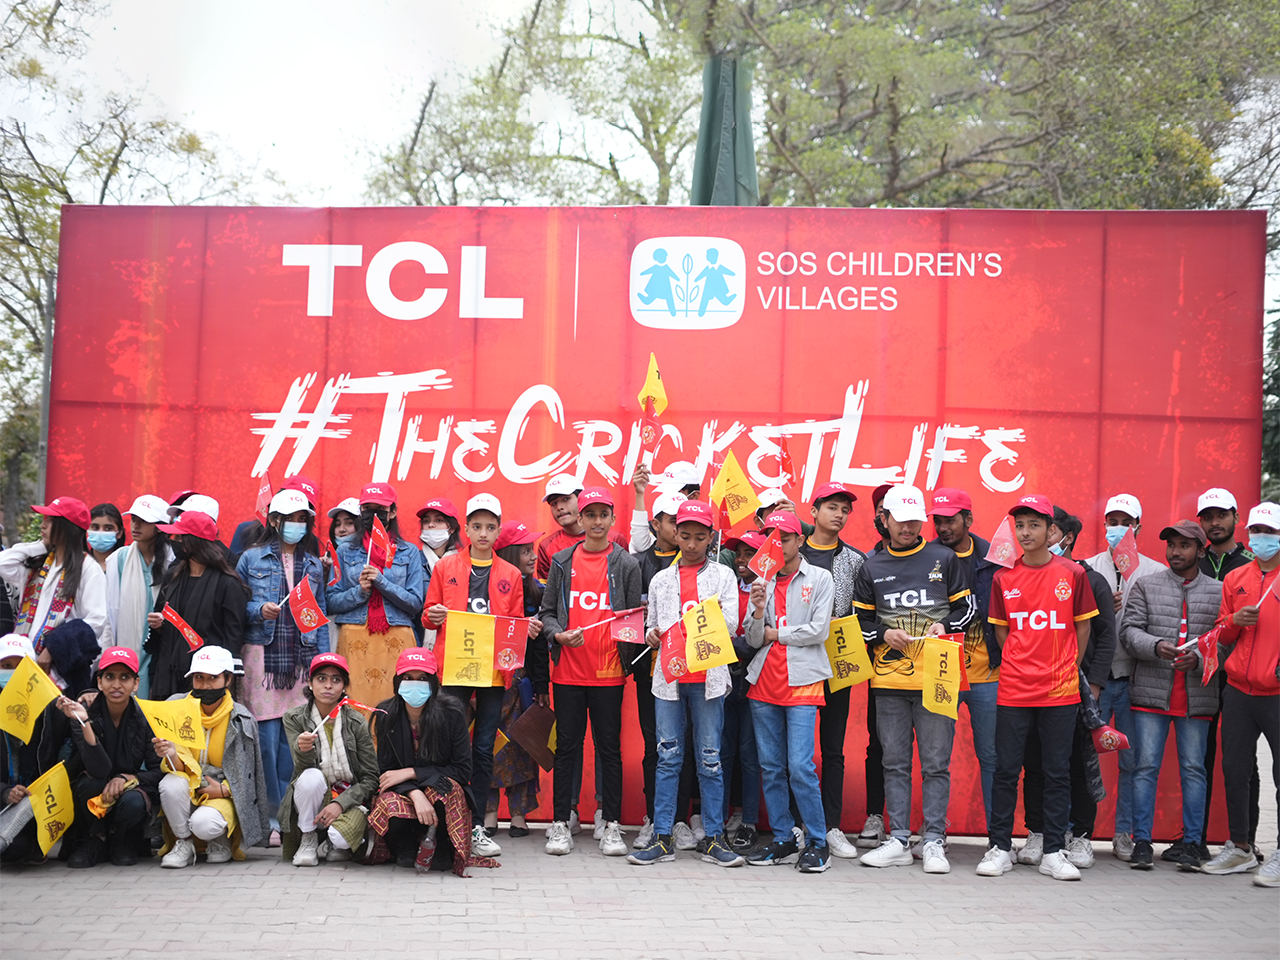 TCL Brings Joy to SOS kids with memorable PSL Stadium Experience